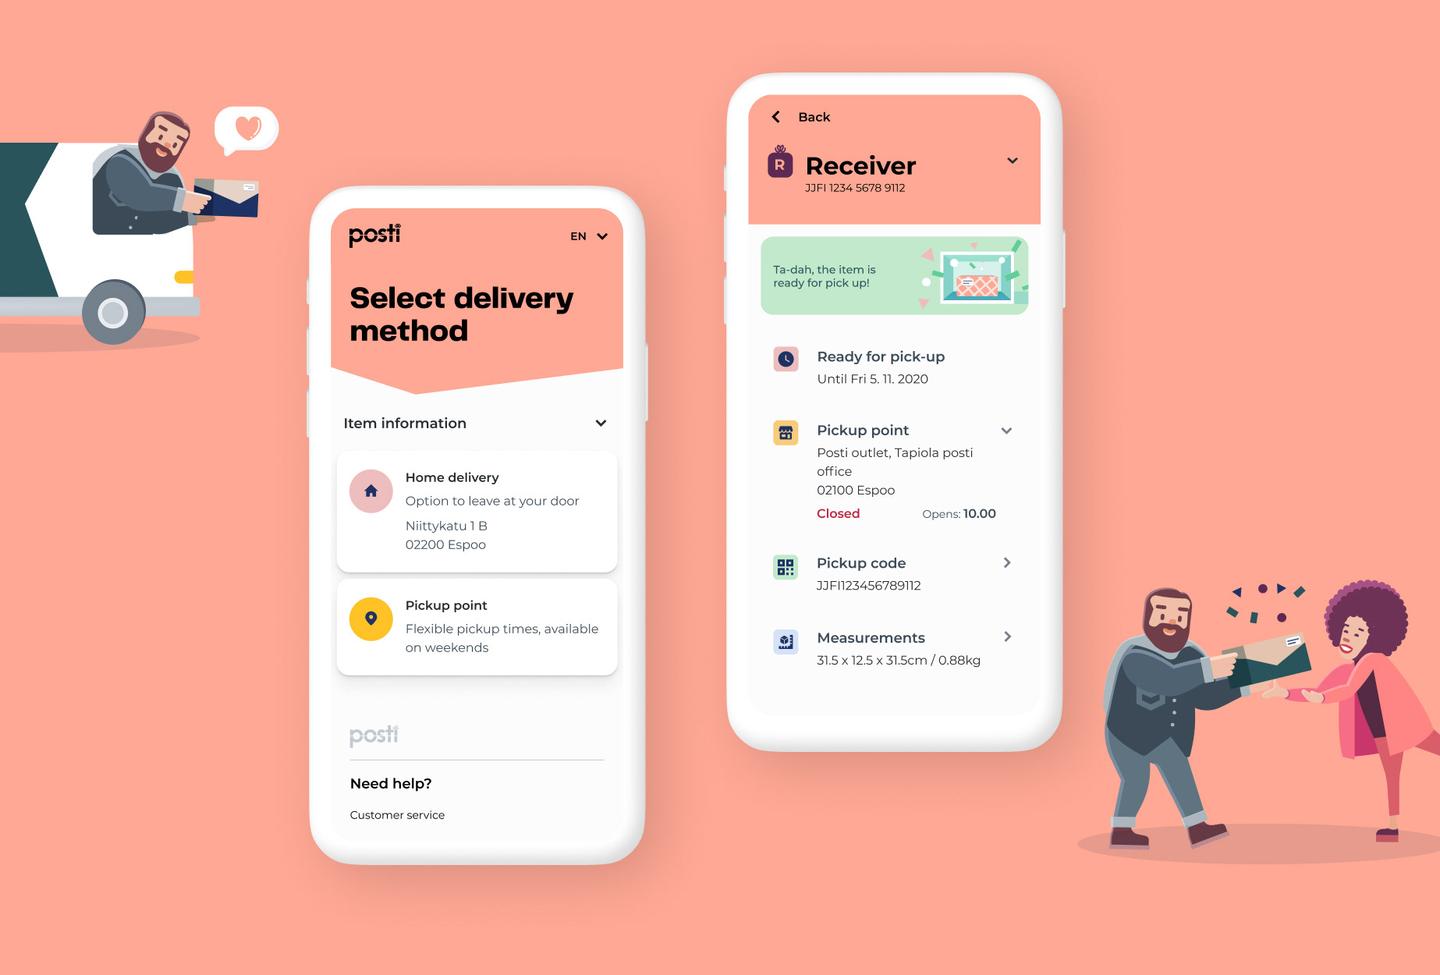 Image features Posti app's new and improved UX design using the app interface for Selection of delivery method on the sender's screen and the Receiver's side detail screen.